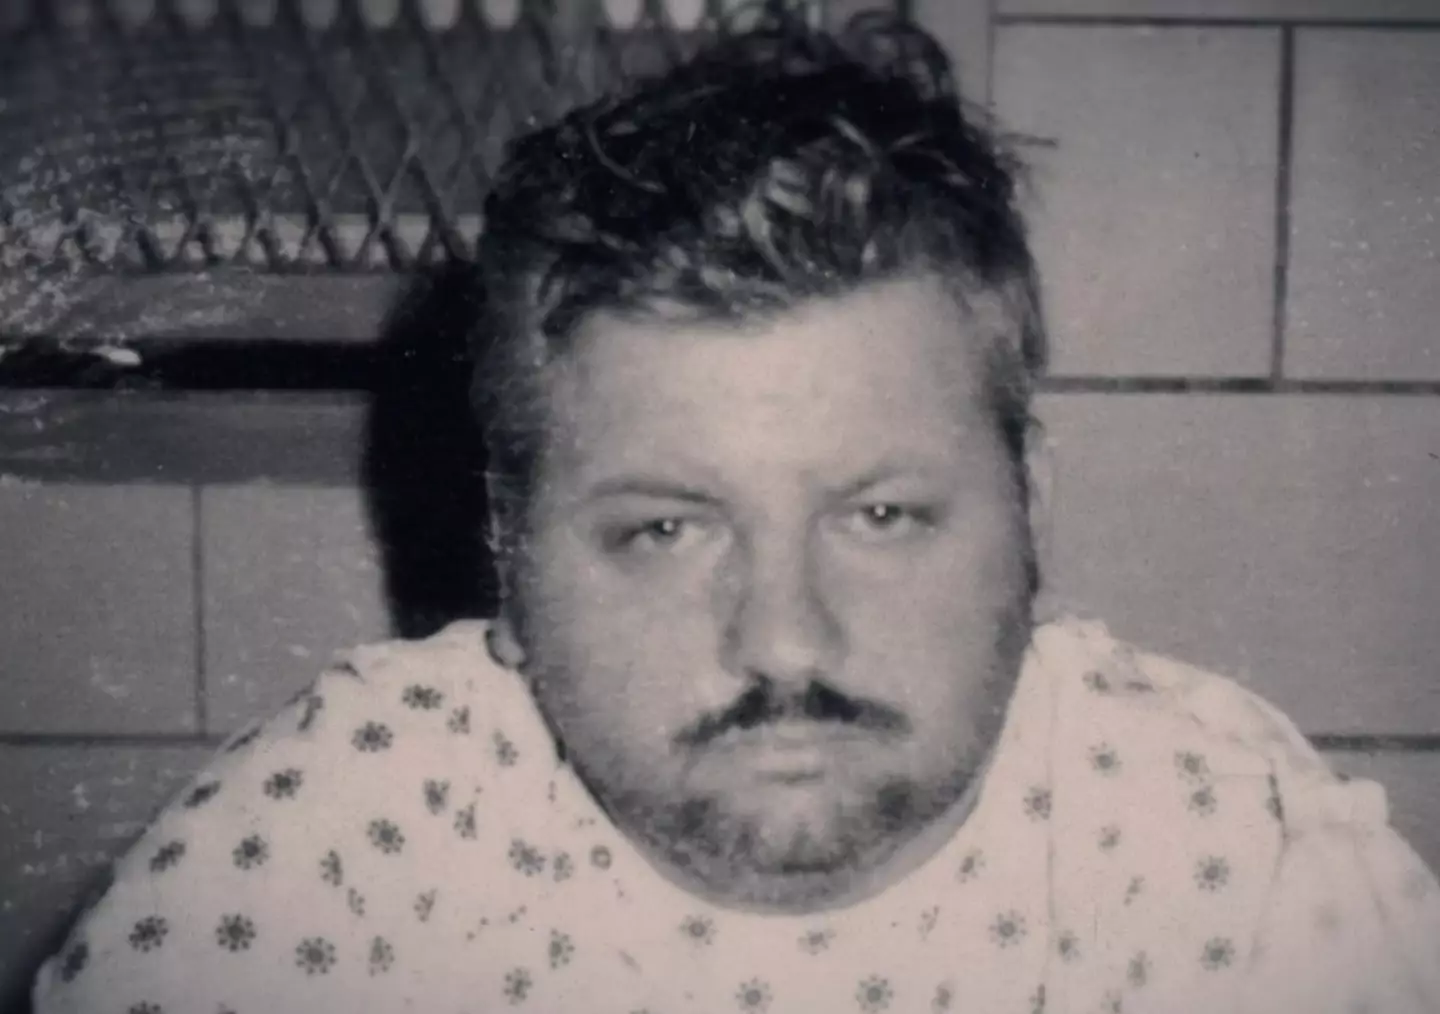 Gacy claimed he was innocent.